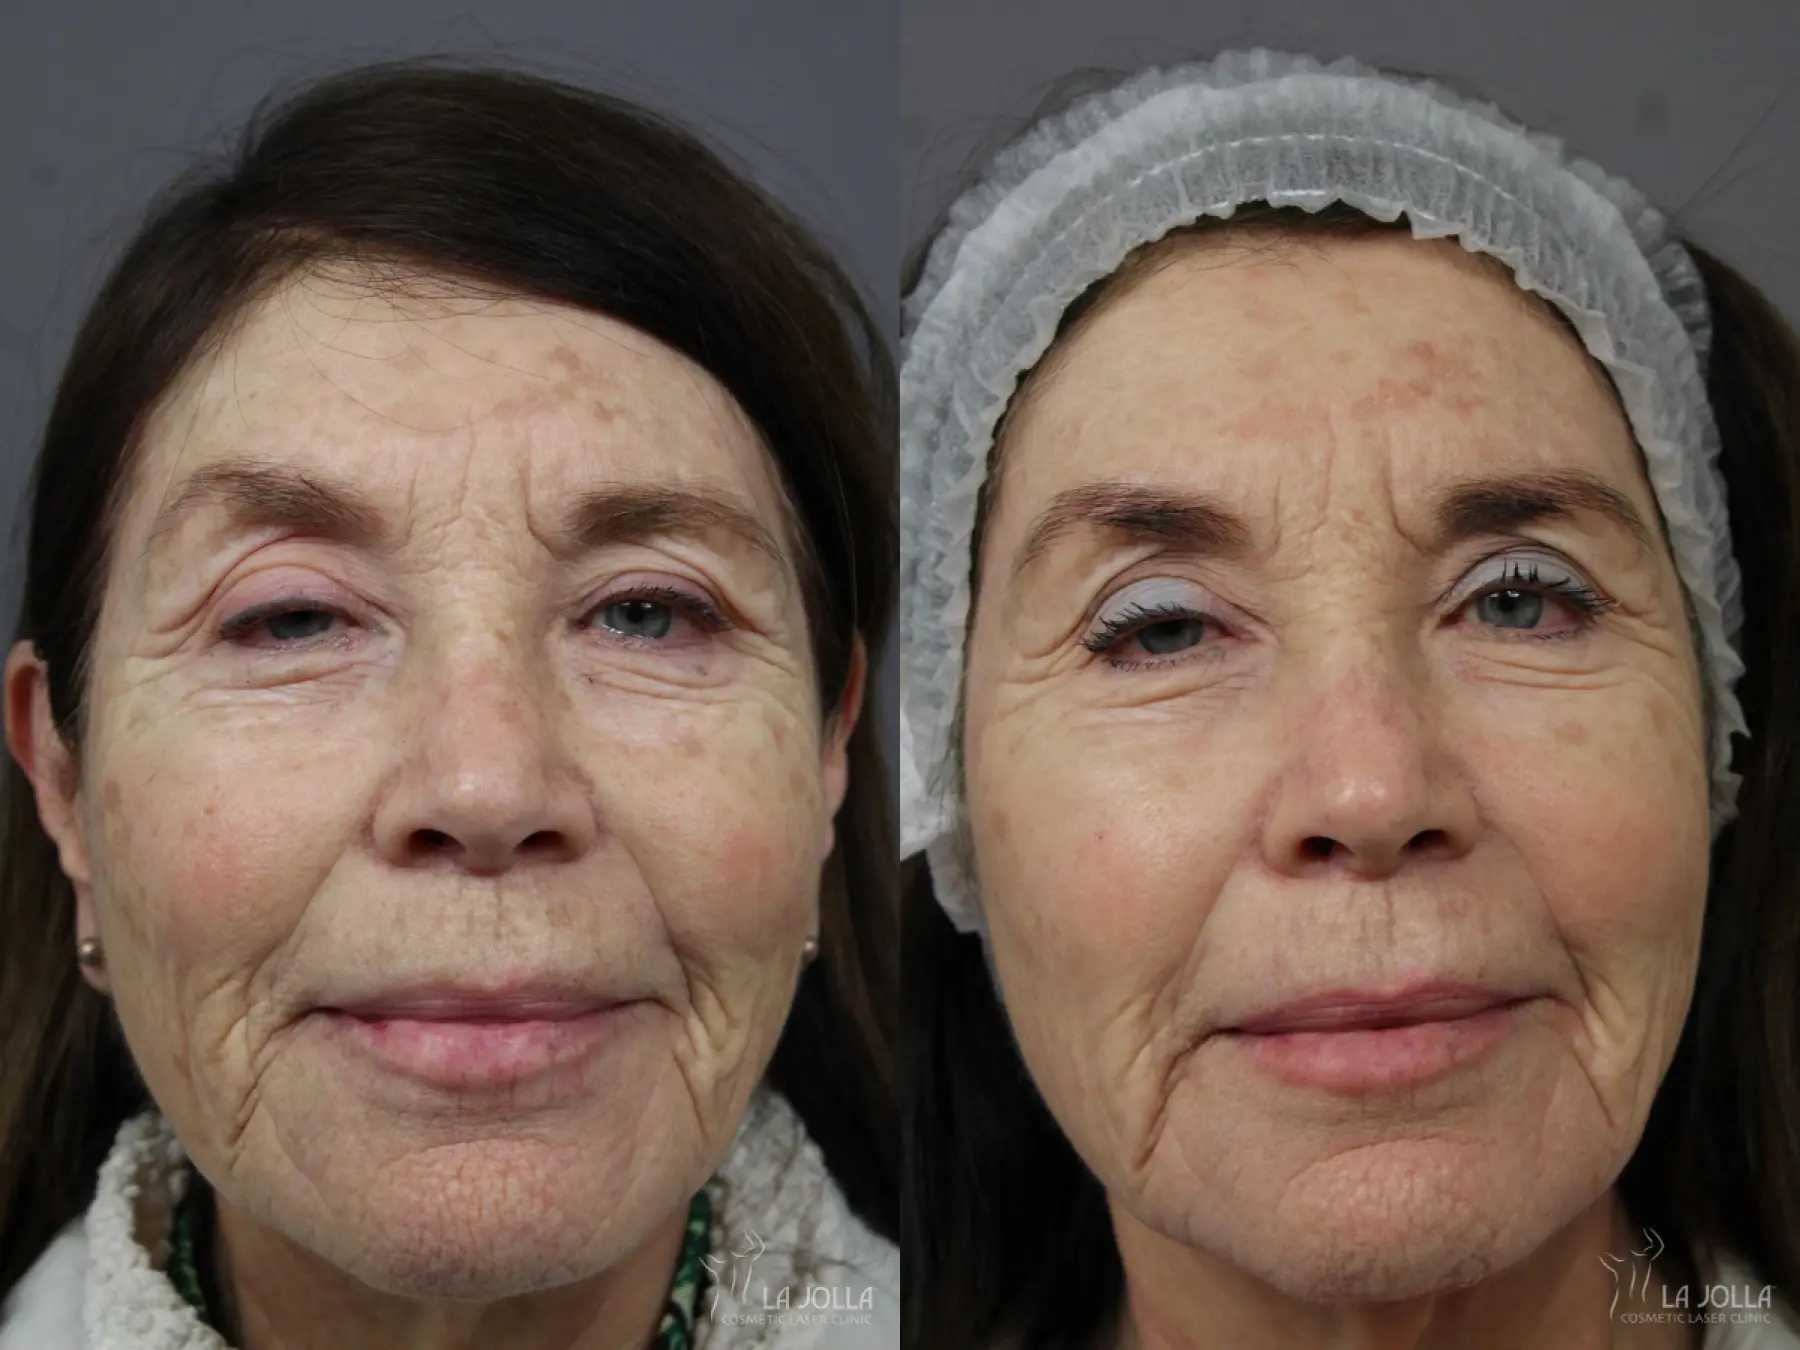 Fraxel®: Patient 1 - Before and After 1